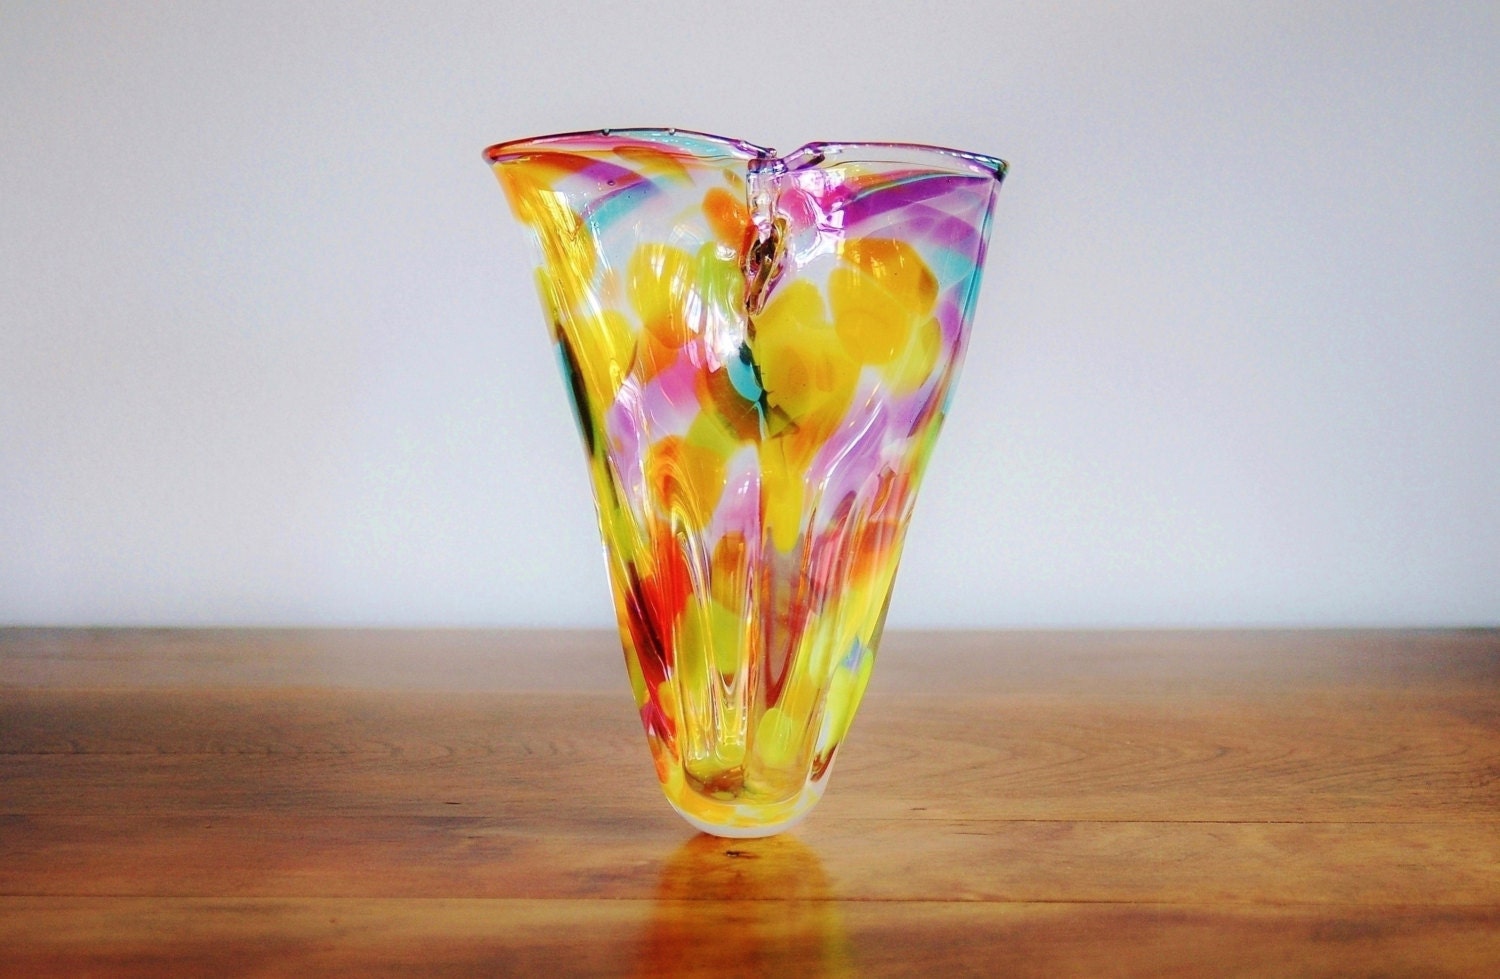 Colored Glass Vase In A Living Room